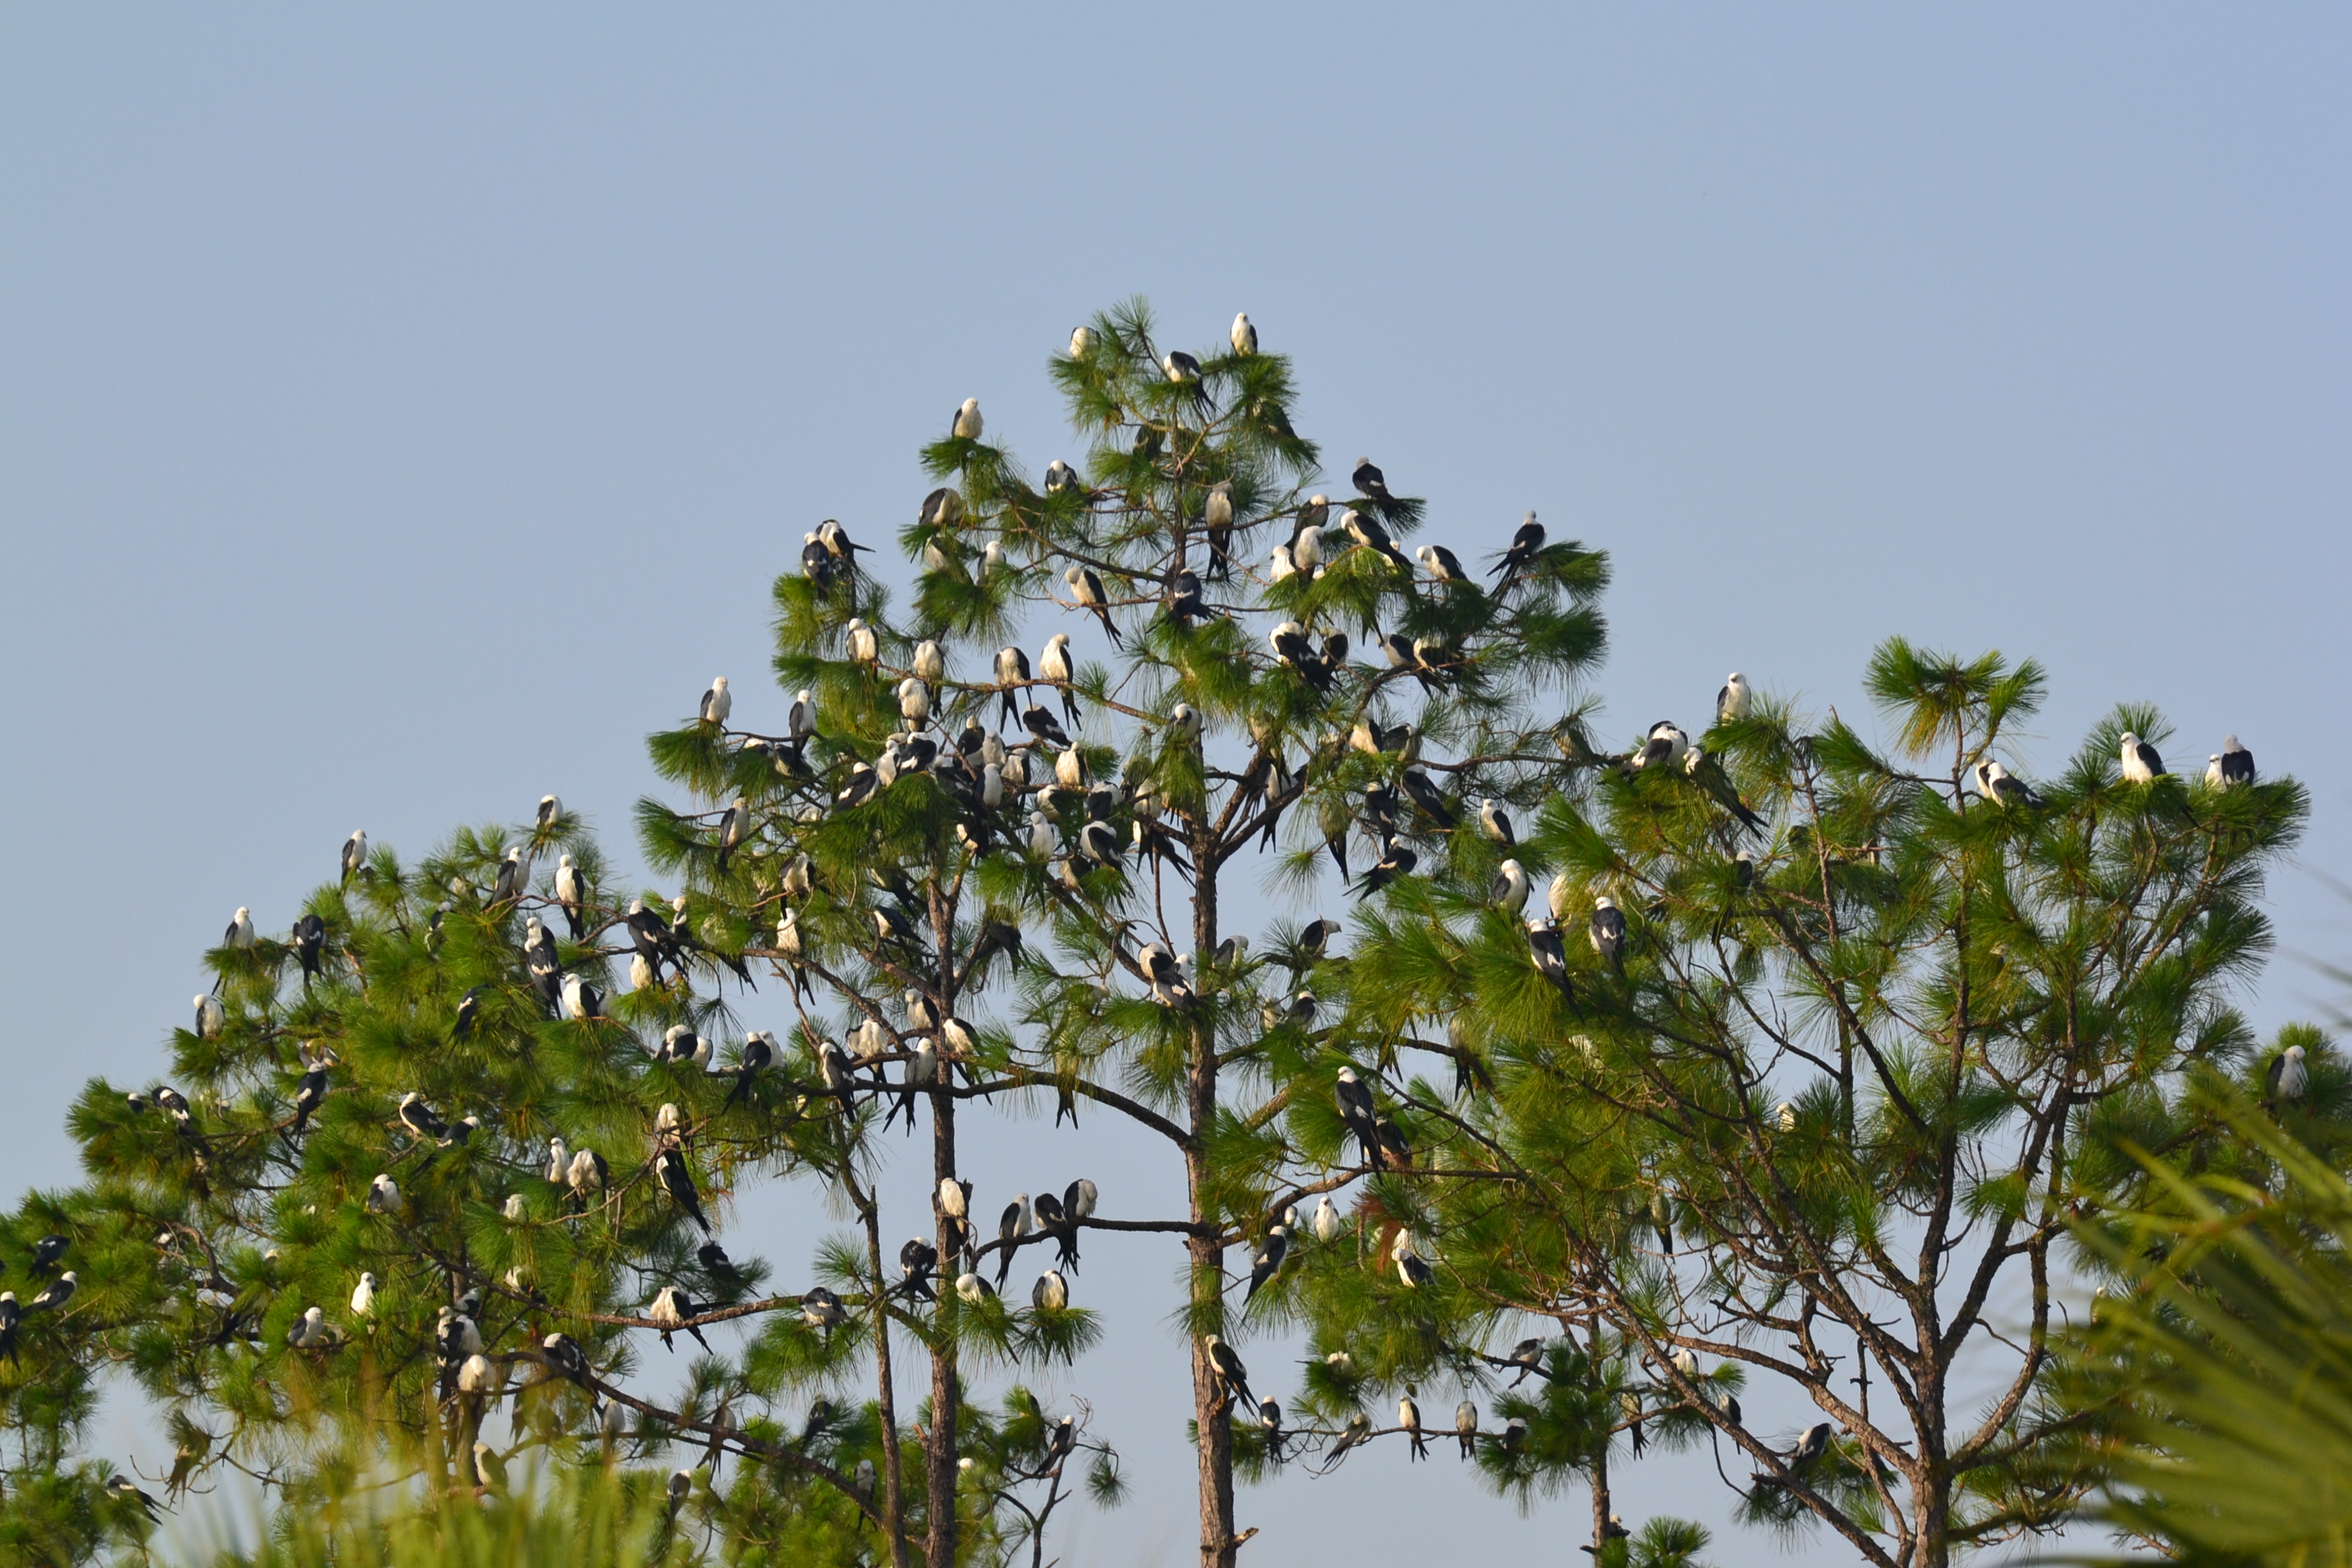 A large group of birds perched in treetops